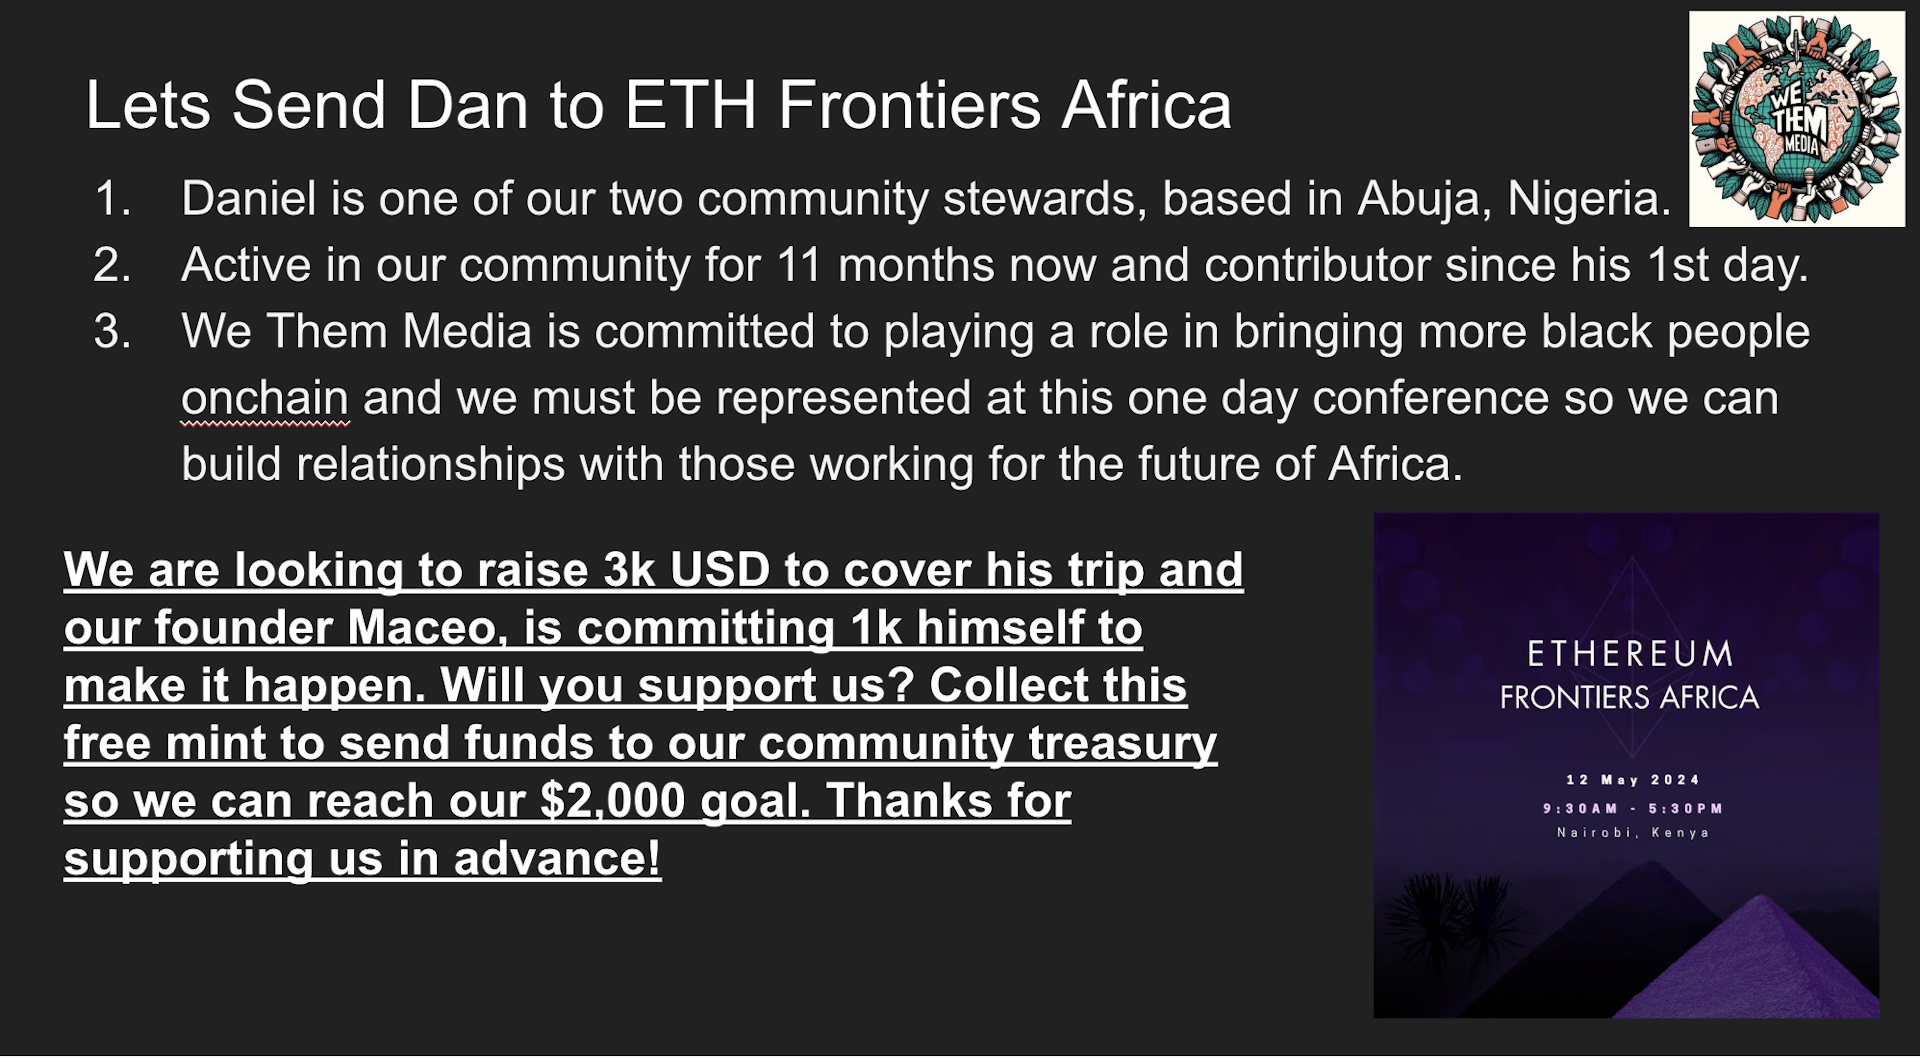 We Them Takes ETHFrontiers Africa